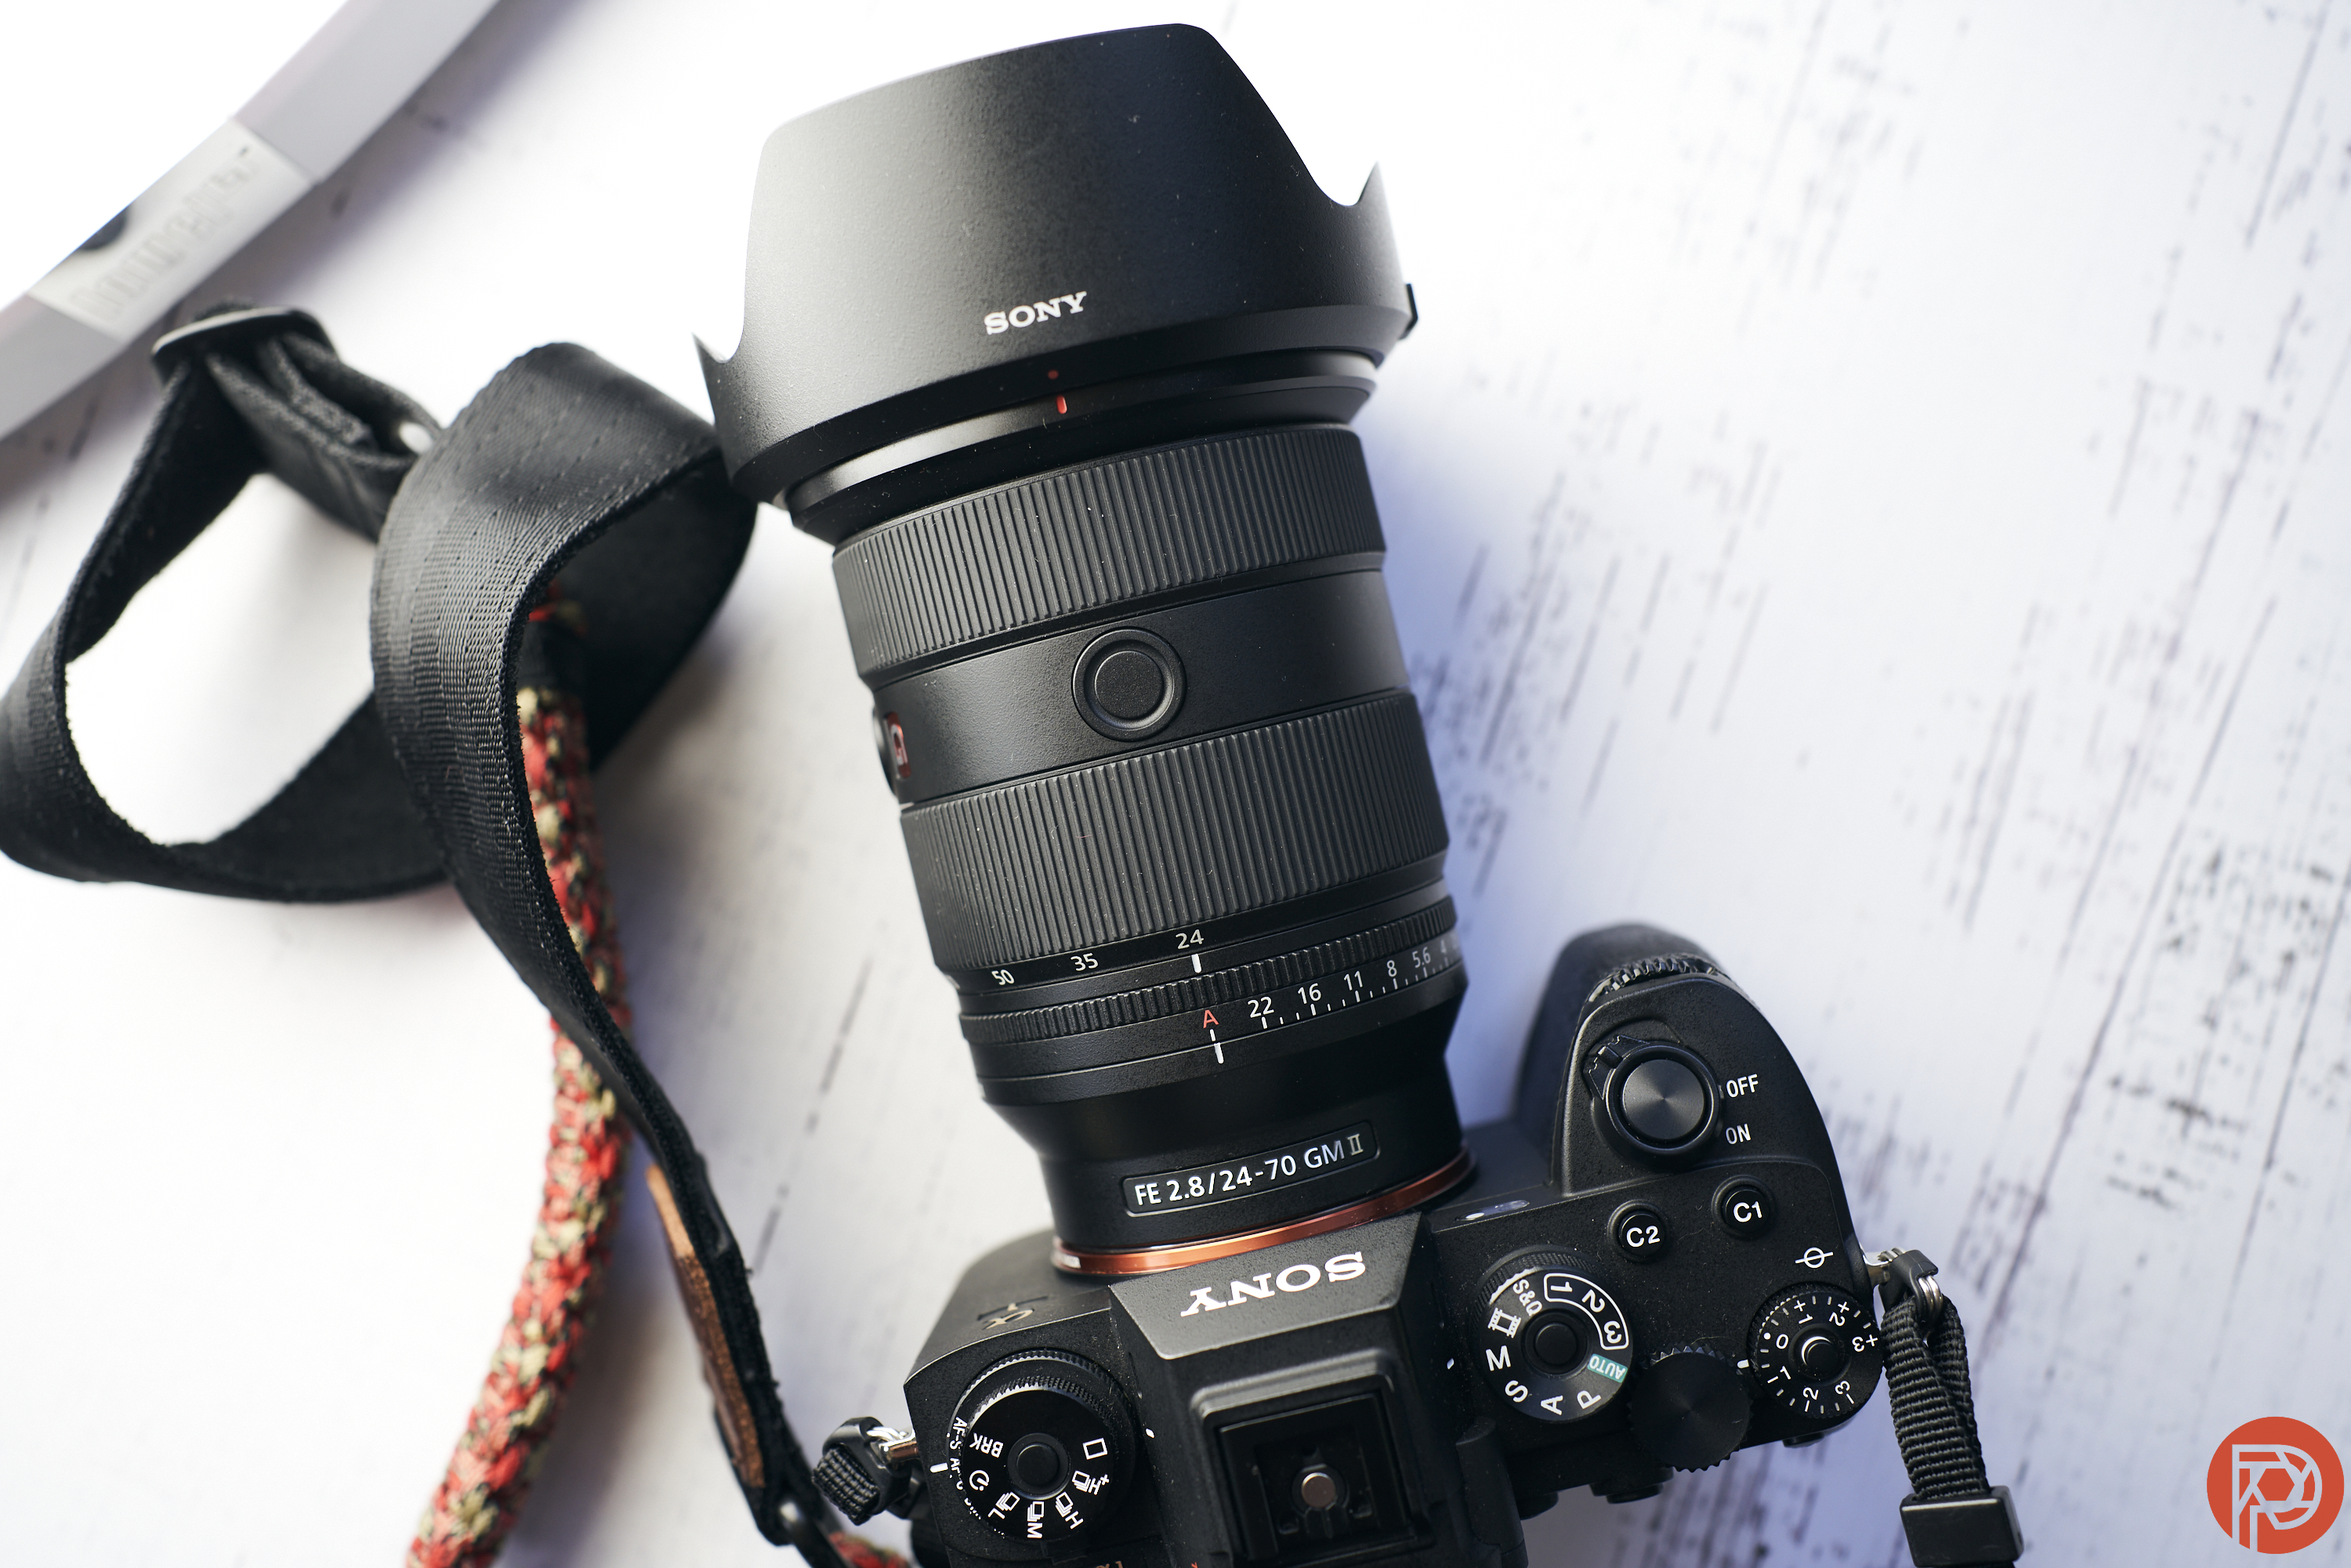 Sony 24-70mm f2.8 G Master II Review: A Fanboy’s Love?